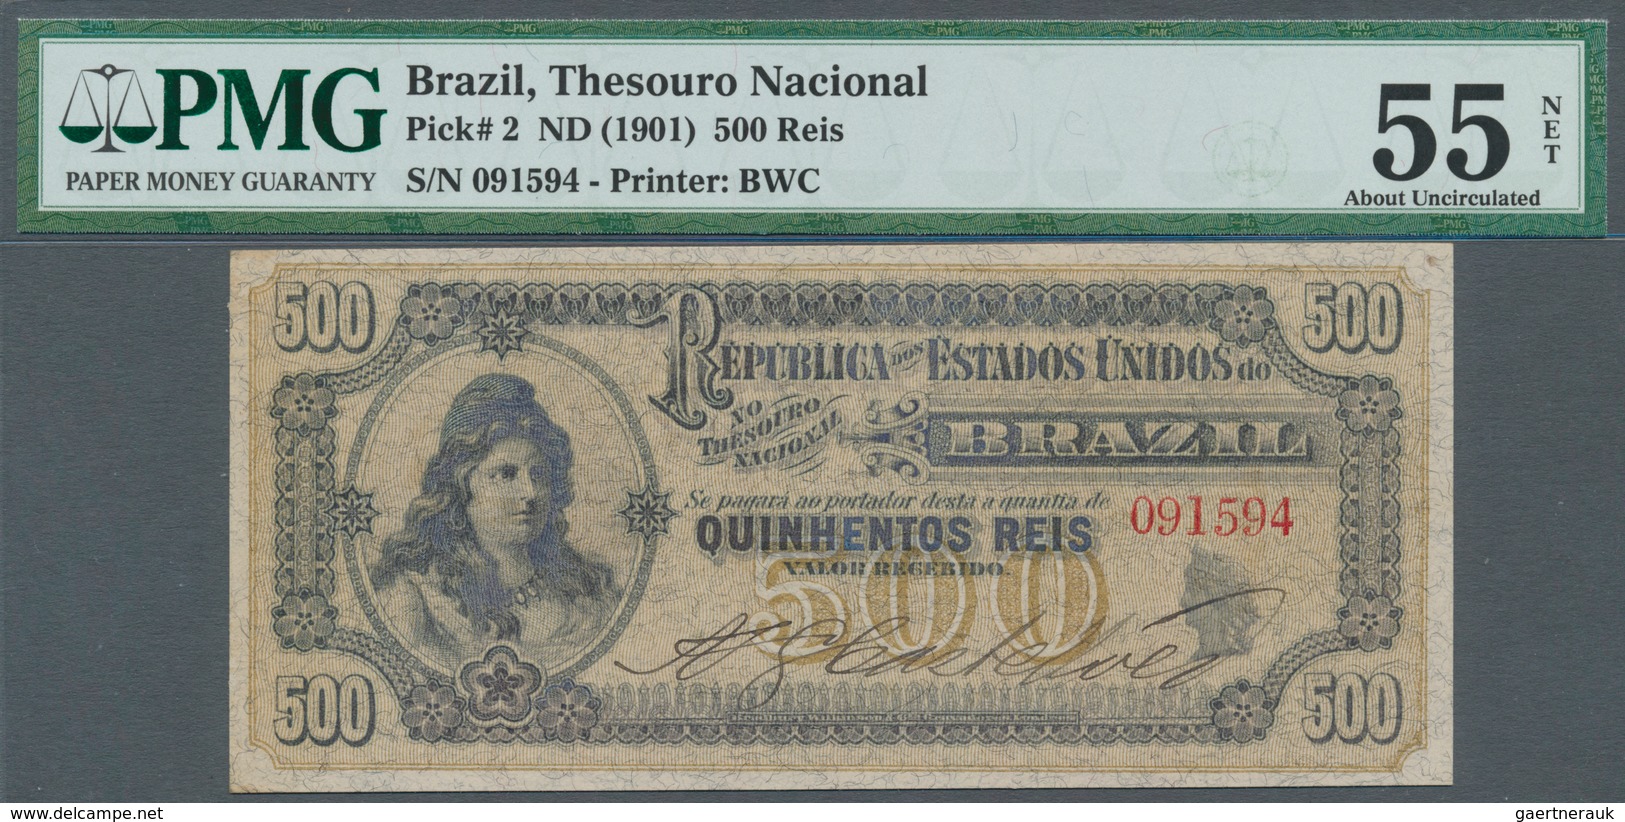 Brazil / Brasilien: 500 Reis ND(1901) P. 2, In Condition: PMG Graded 55 AUNC NET (Previously Mounted - Brasil